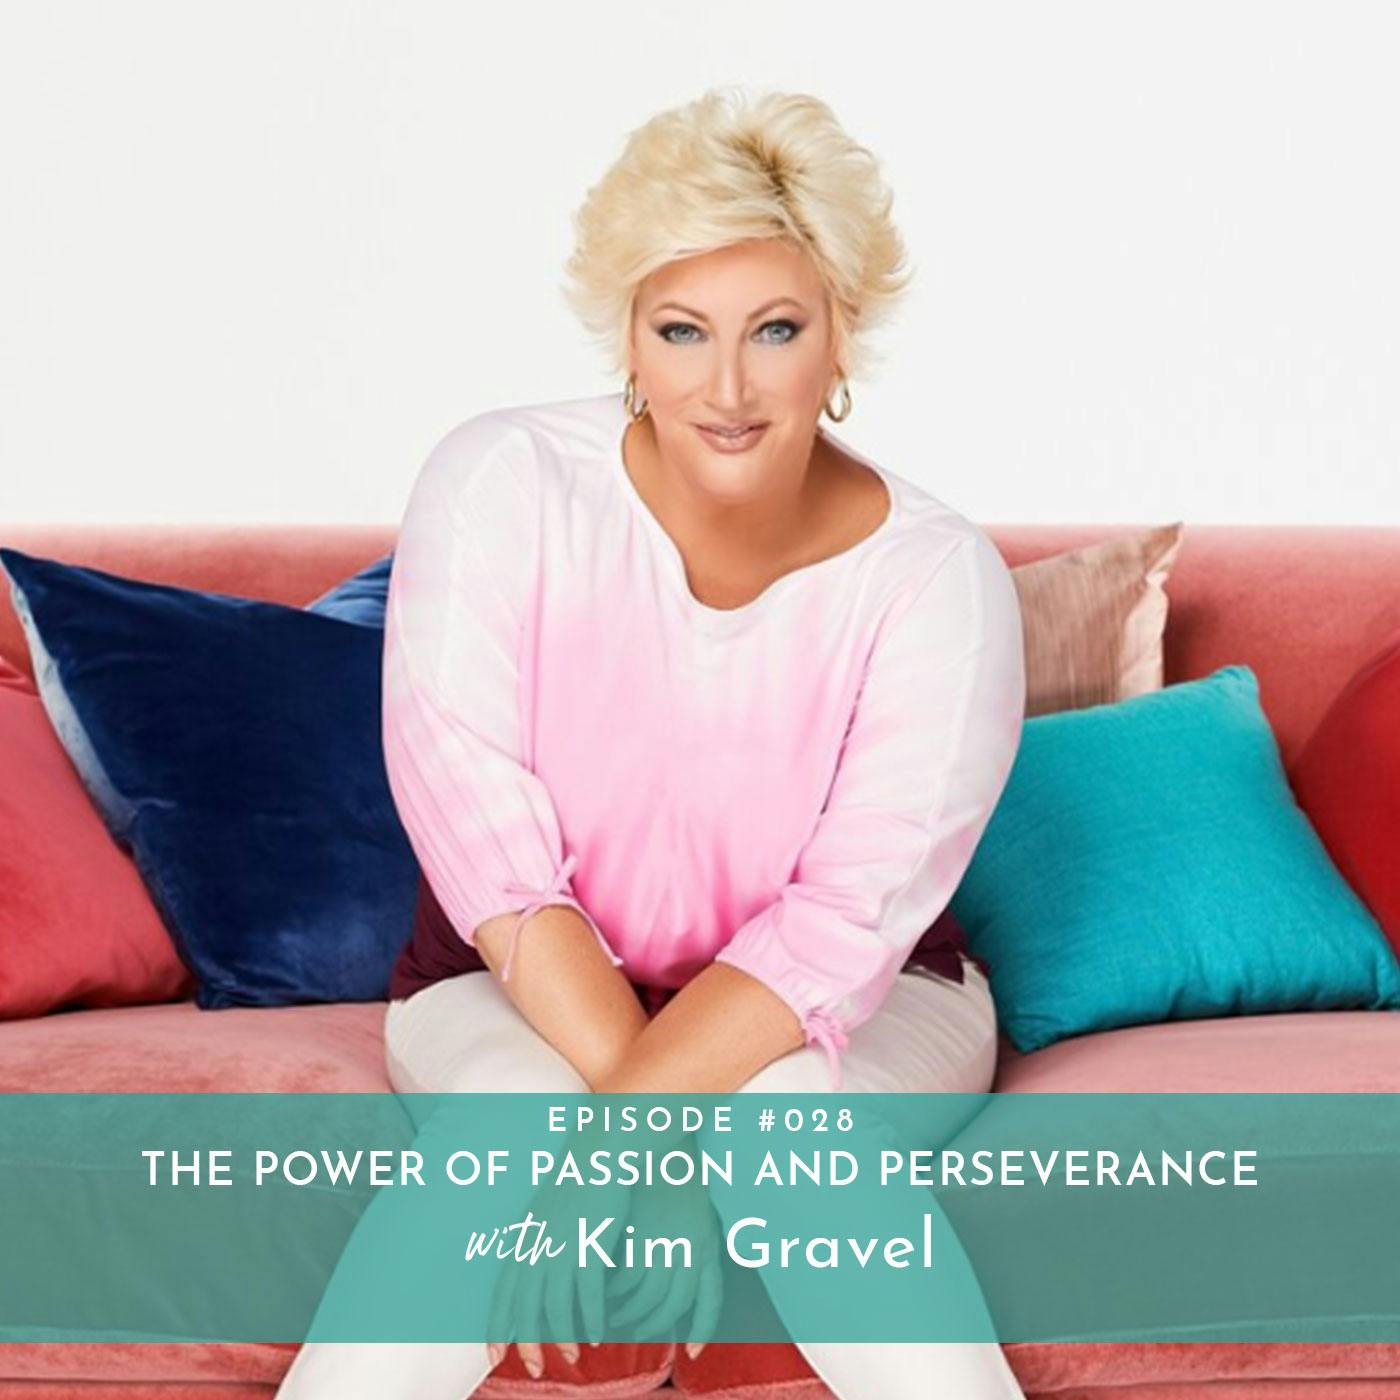 The Power of Passion and Perseverance with Kim Gravel